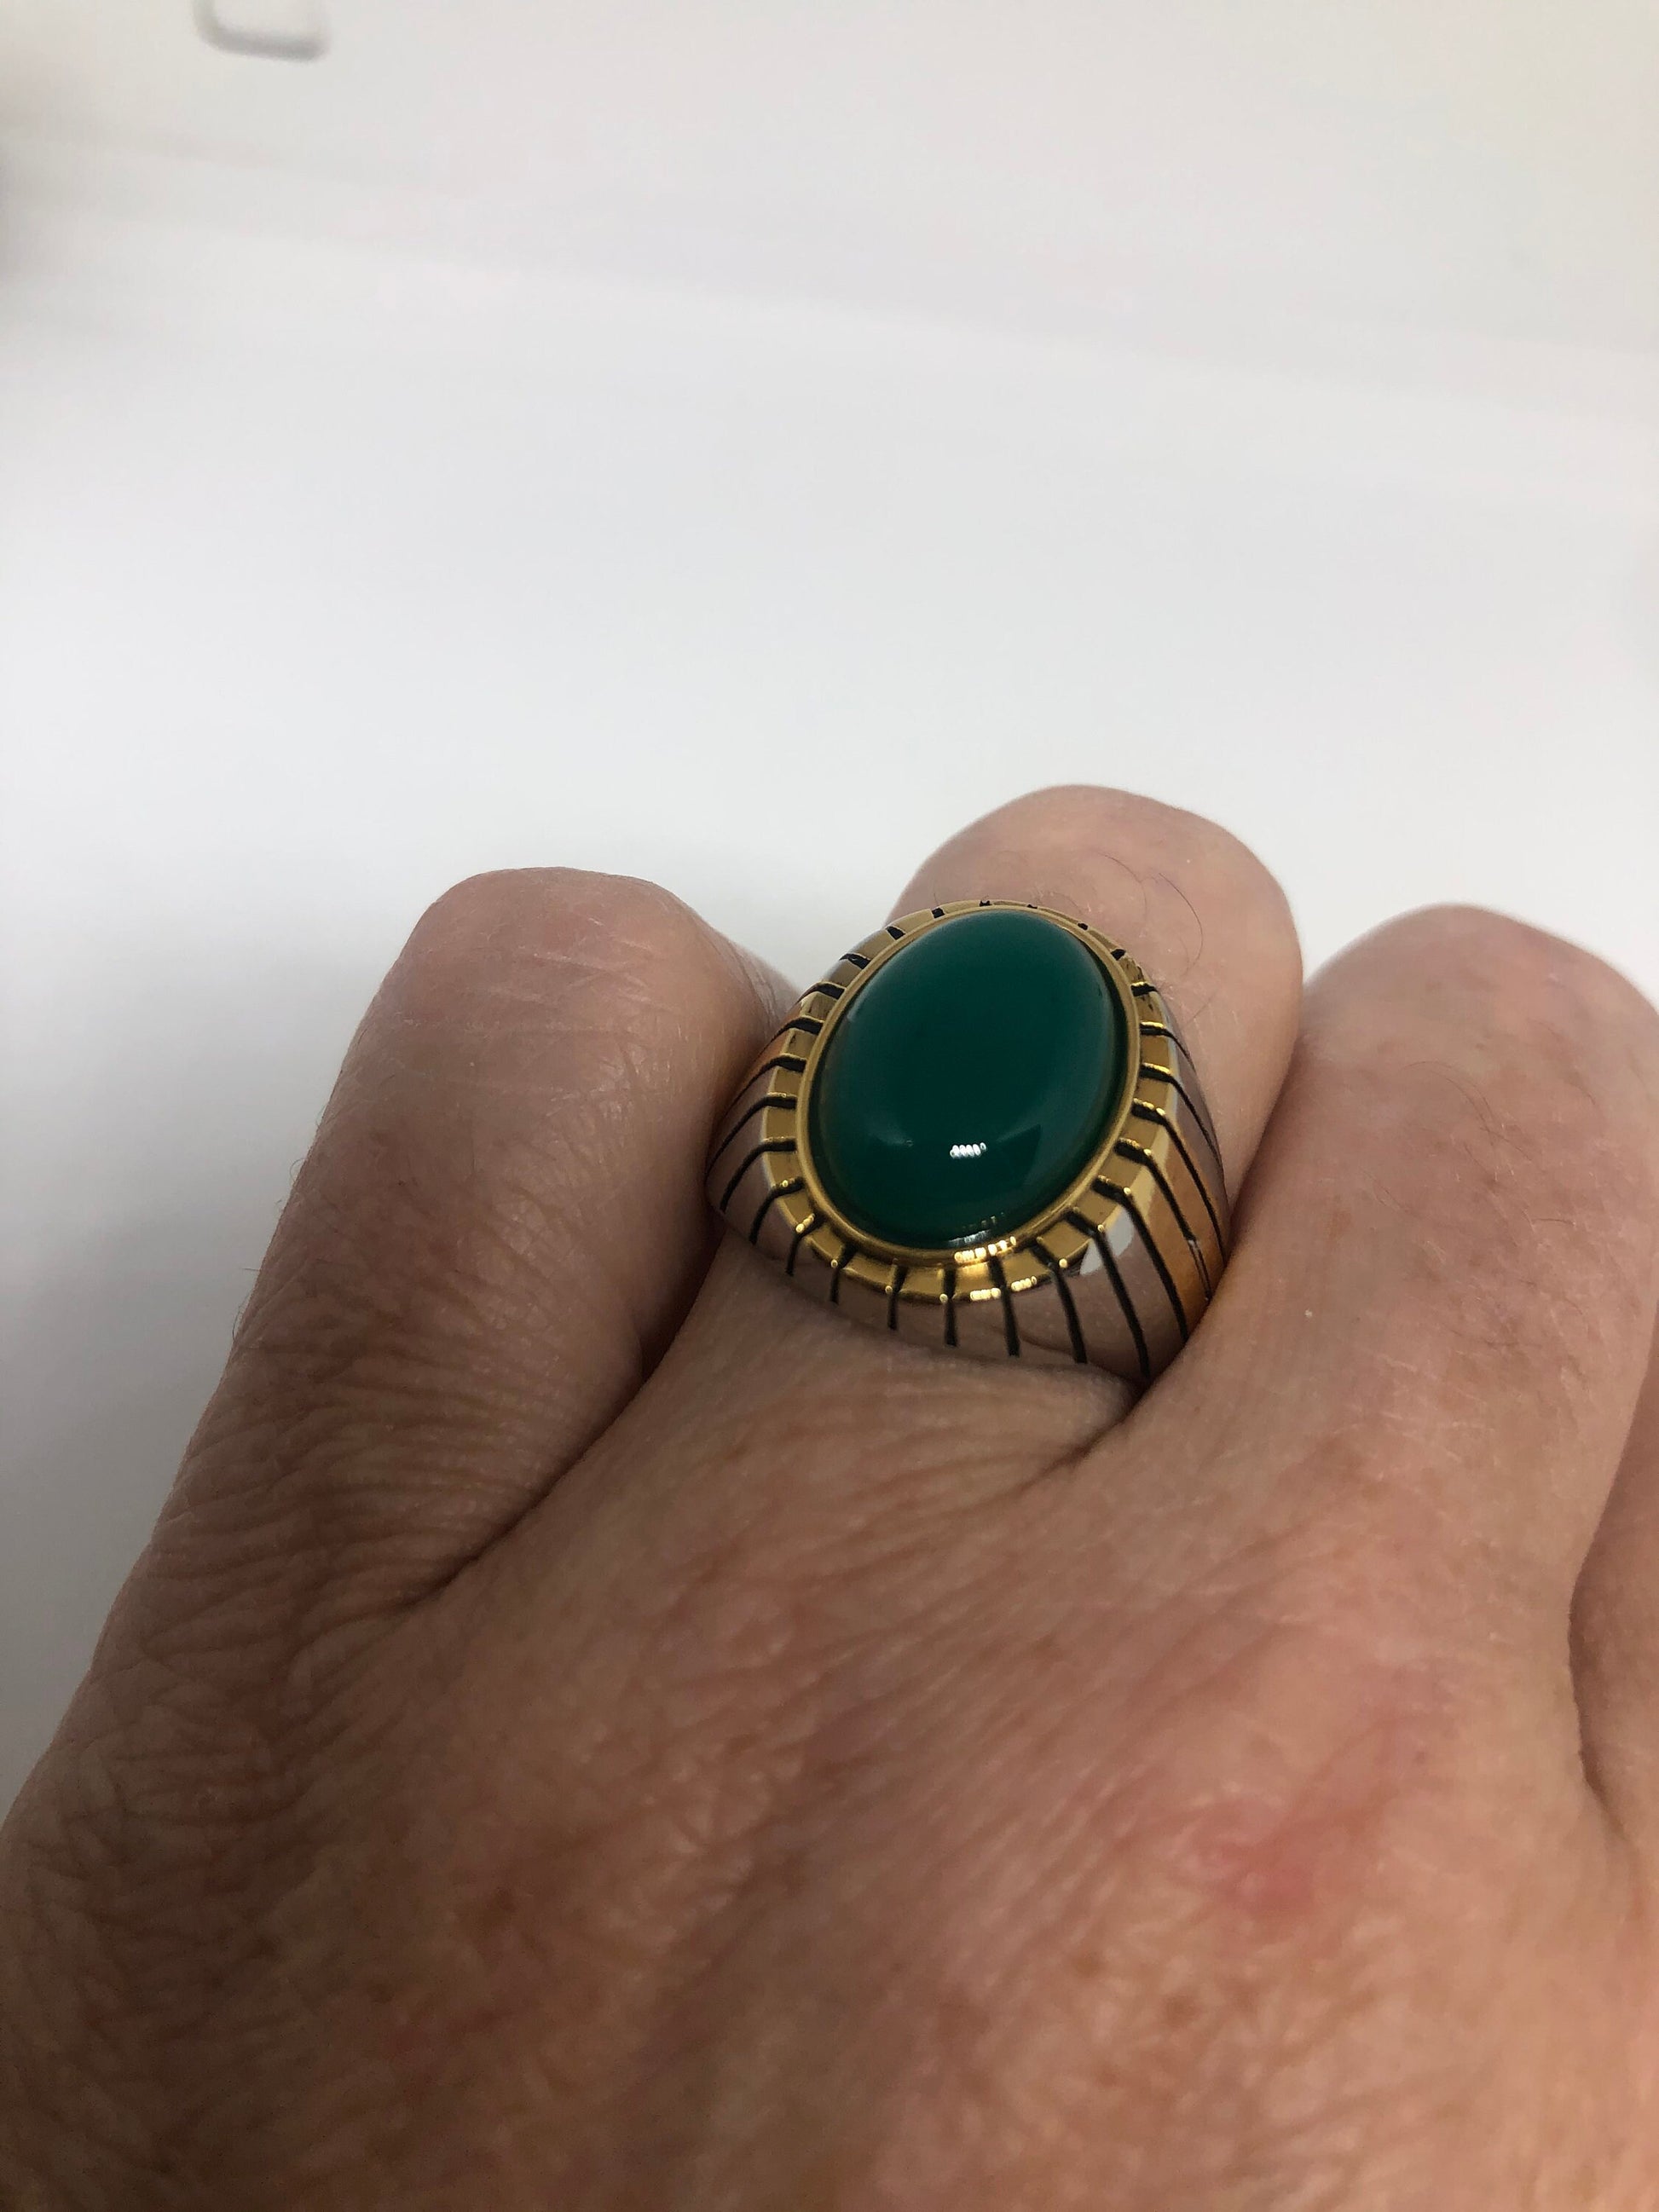 Vintage Gothic Gold Silver Stainless Steel Genuine Green Onyx Mens Ring